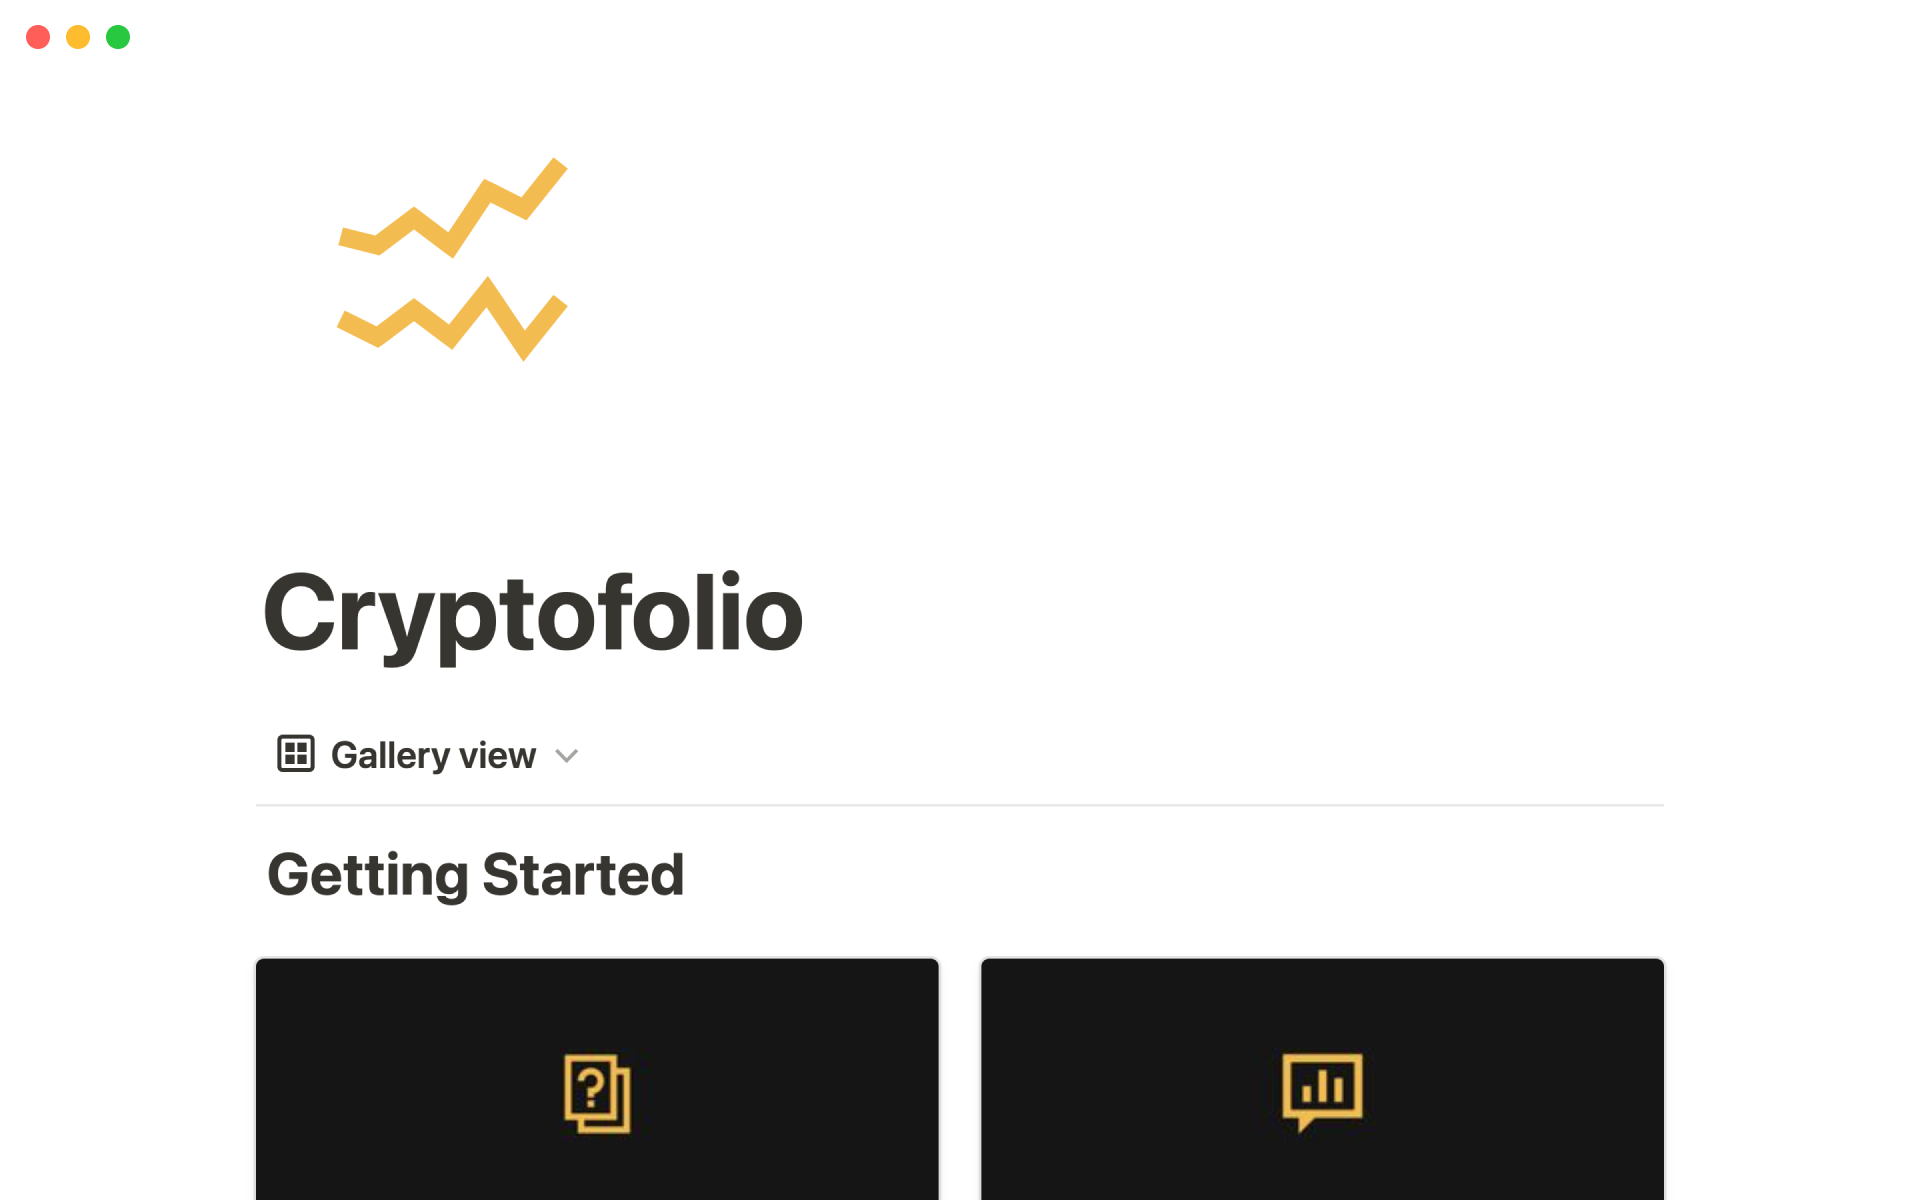 Track all your crypto investments in one place.